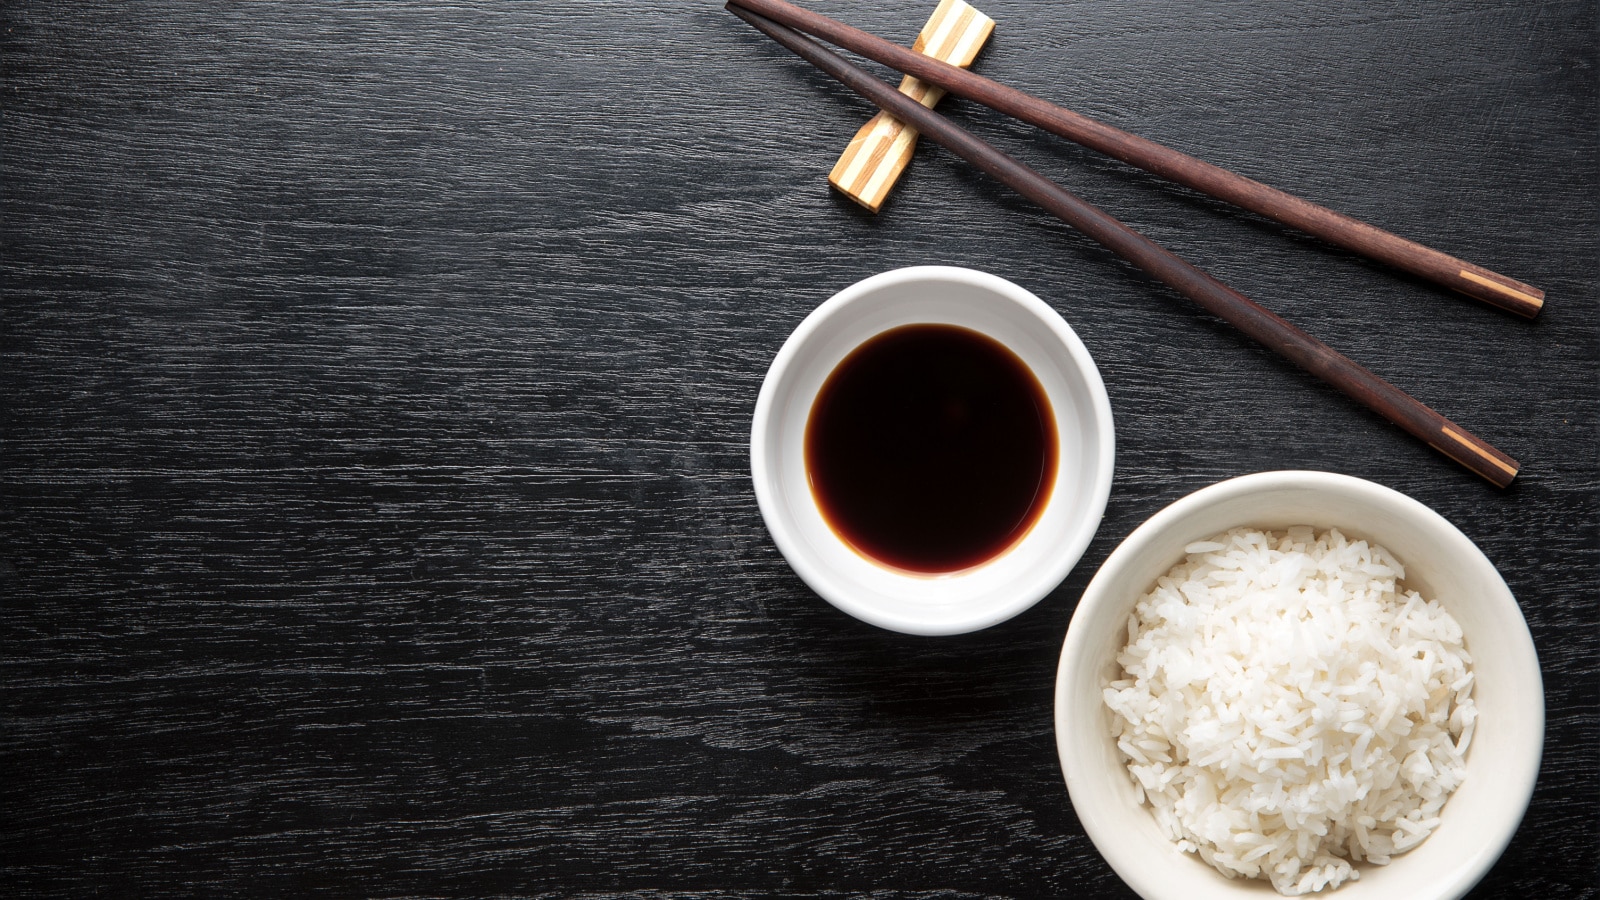 Japanese sushi chopsticks over soy sauce bowl, rice on black background. Top view with copy space